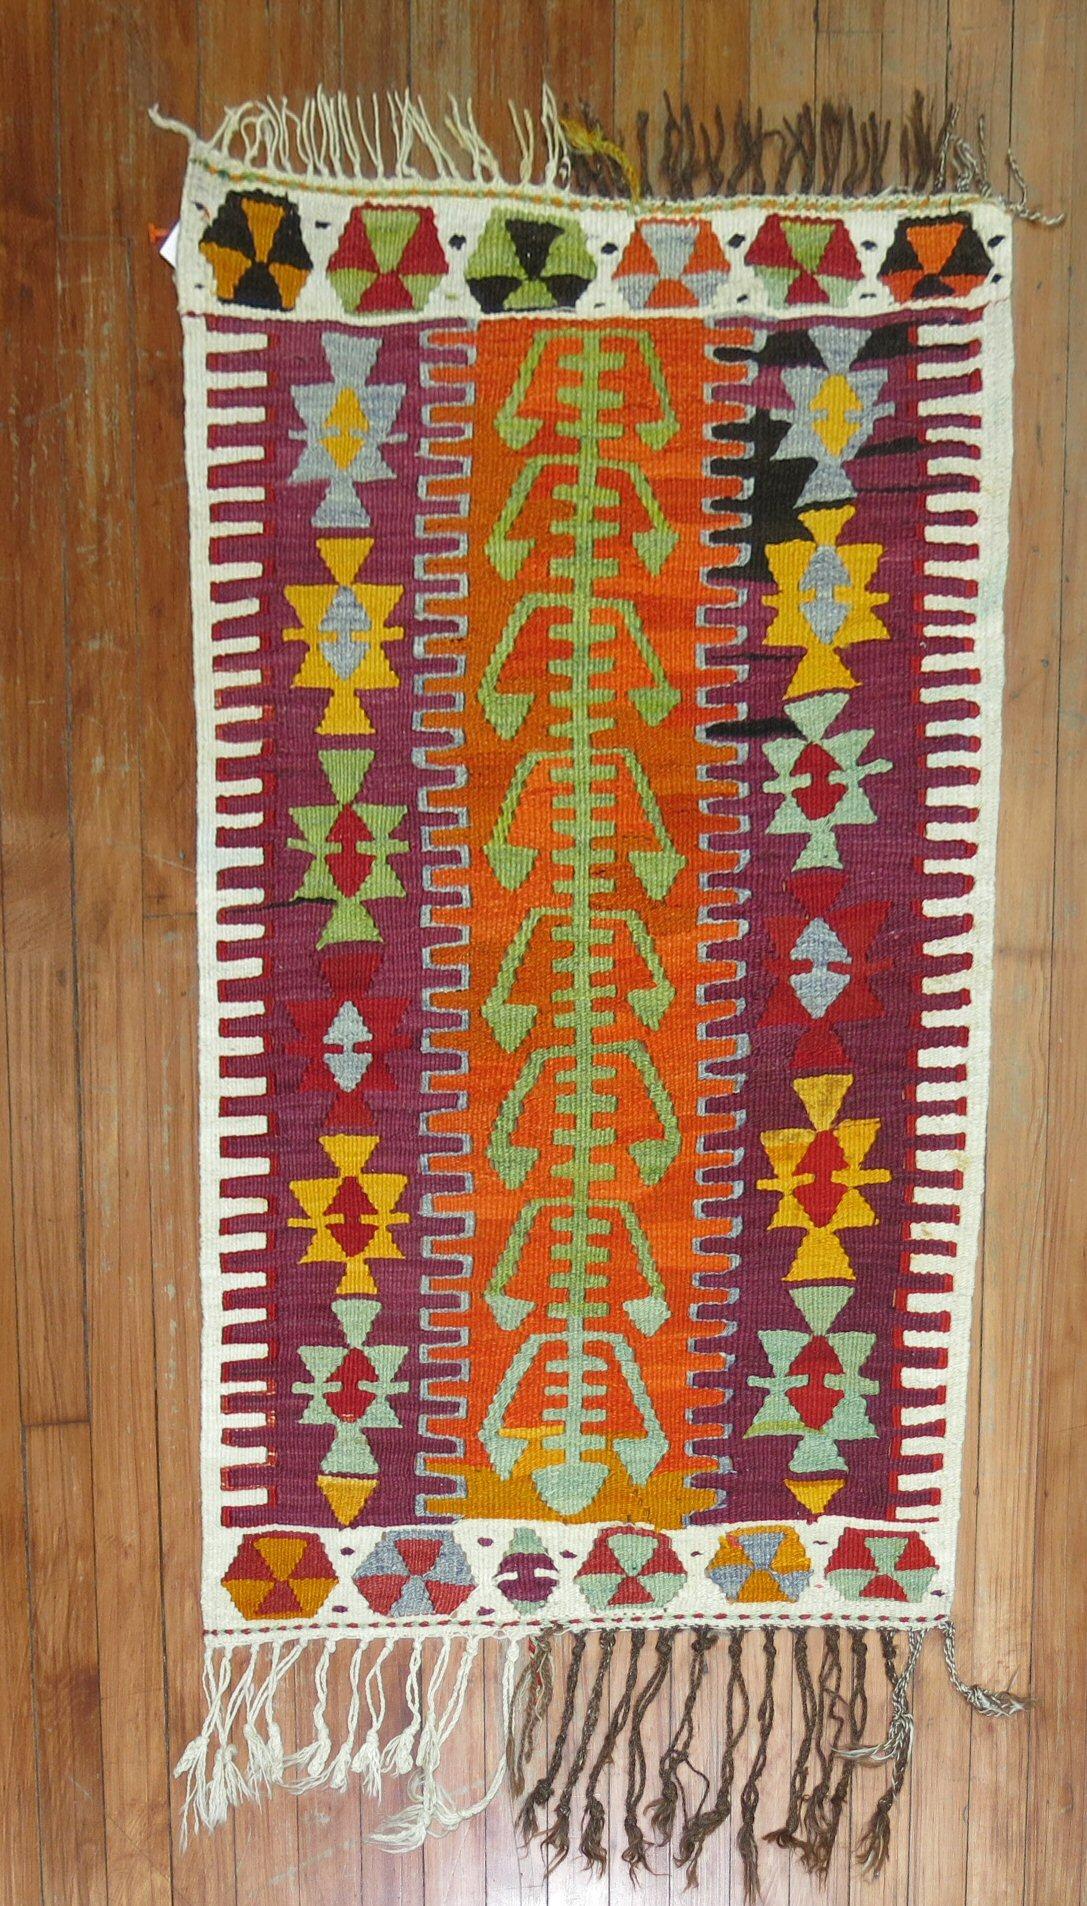 A scatter Turkish Kilim from the mid-20th century highlighted in purple & orange shades

Measures: 2'4'' x 3'7